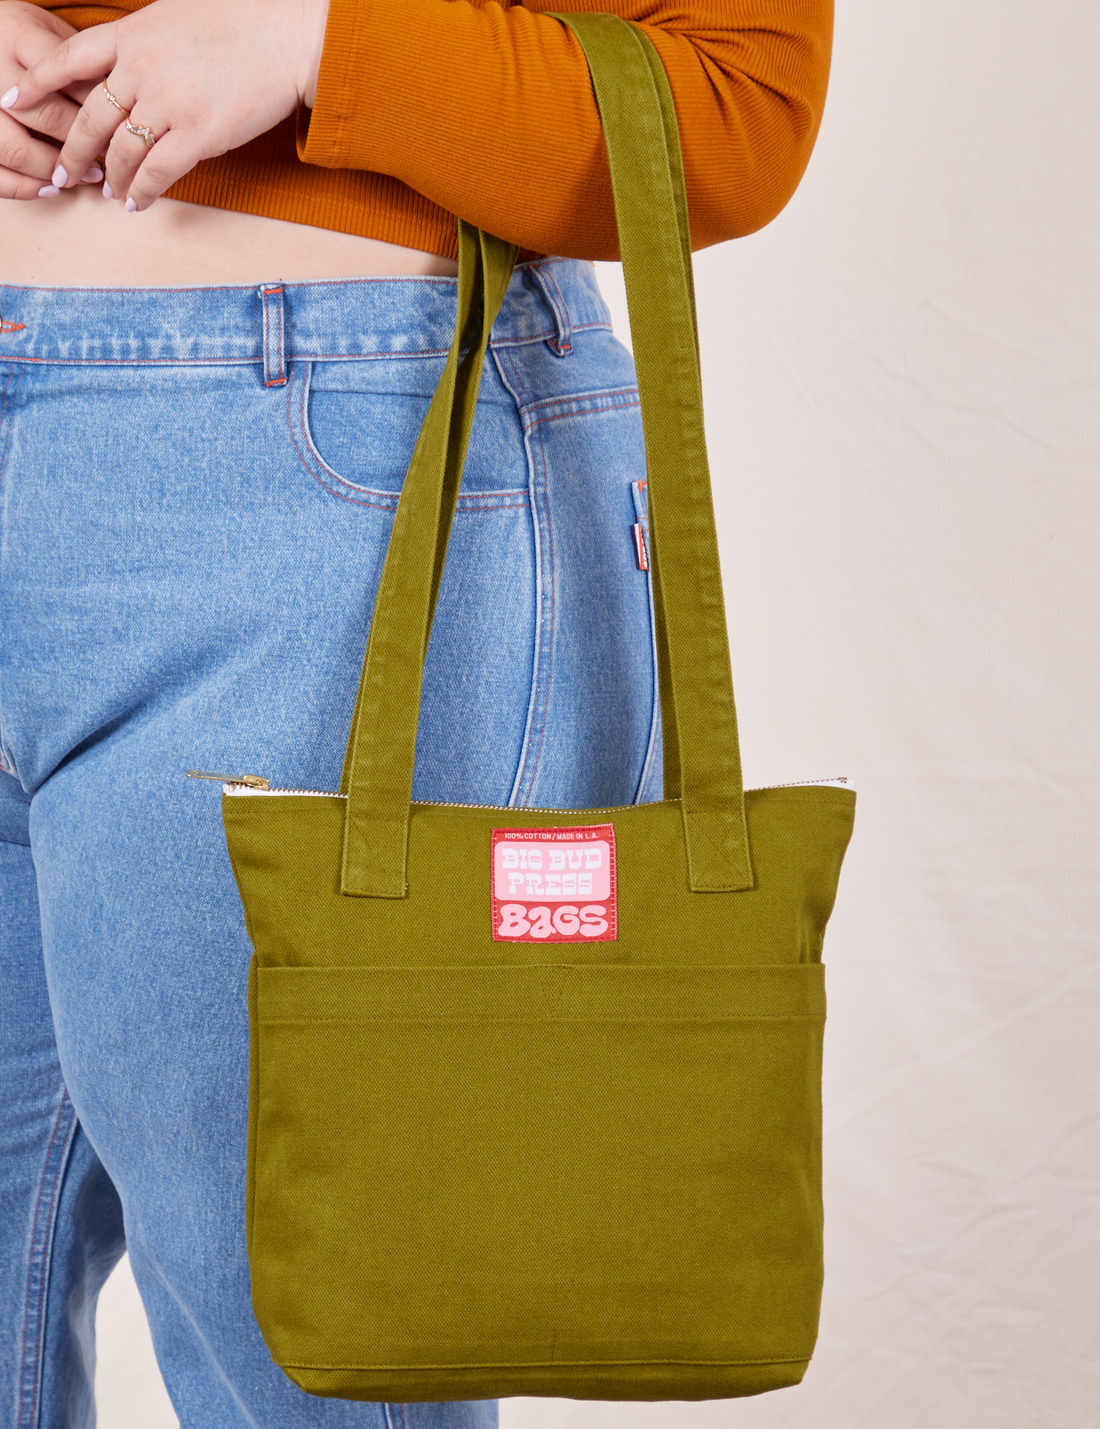 Over-Shoulder Zip Mini Tote in Olive Ground on model's arm